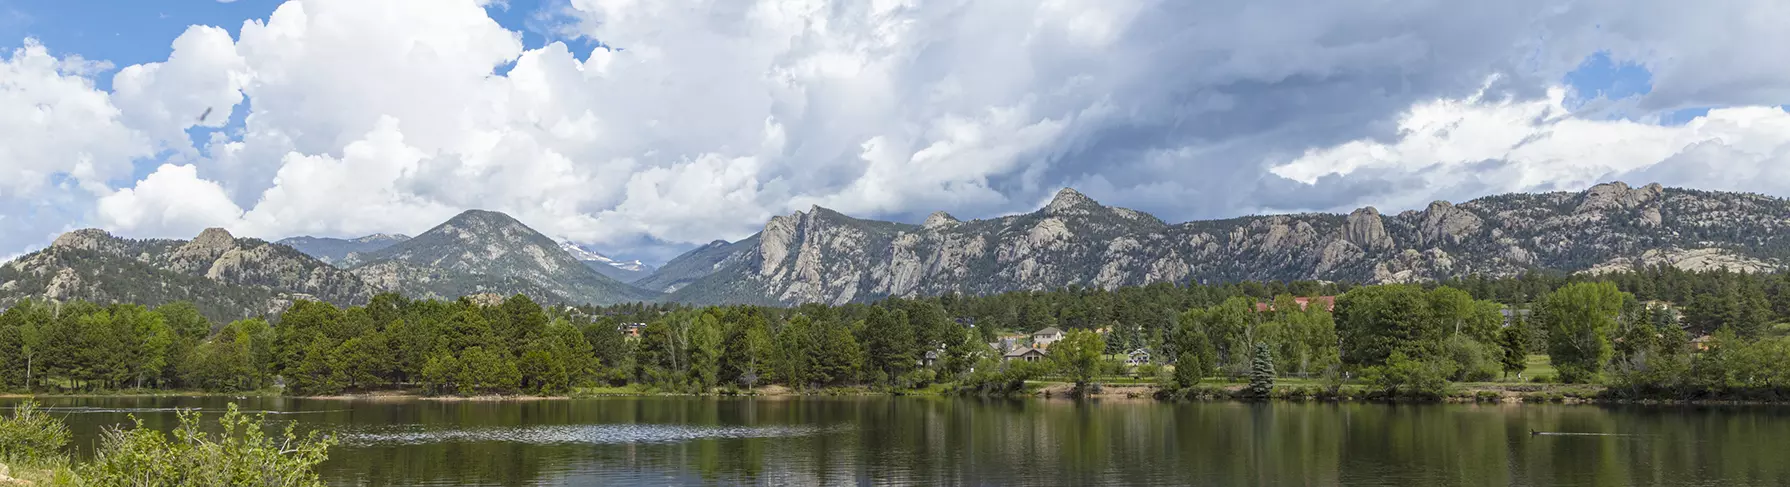 View from the south shore of Lake Estes